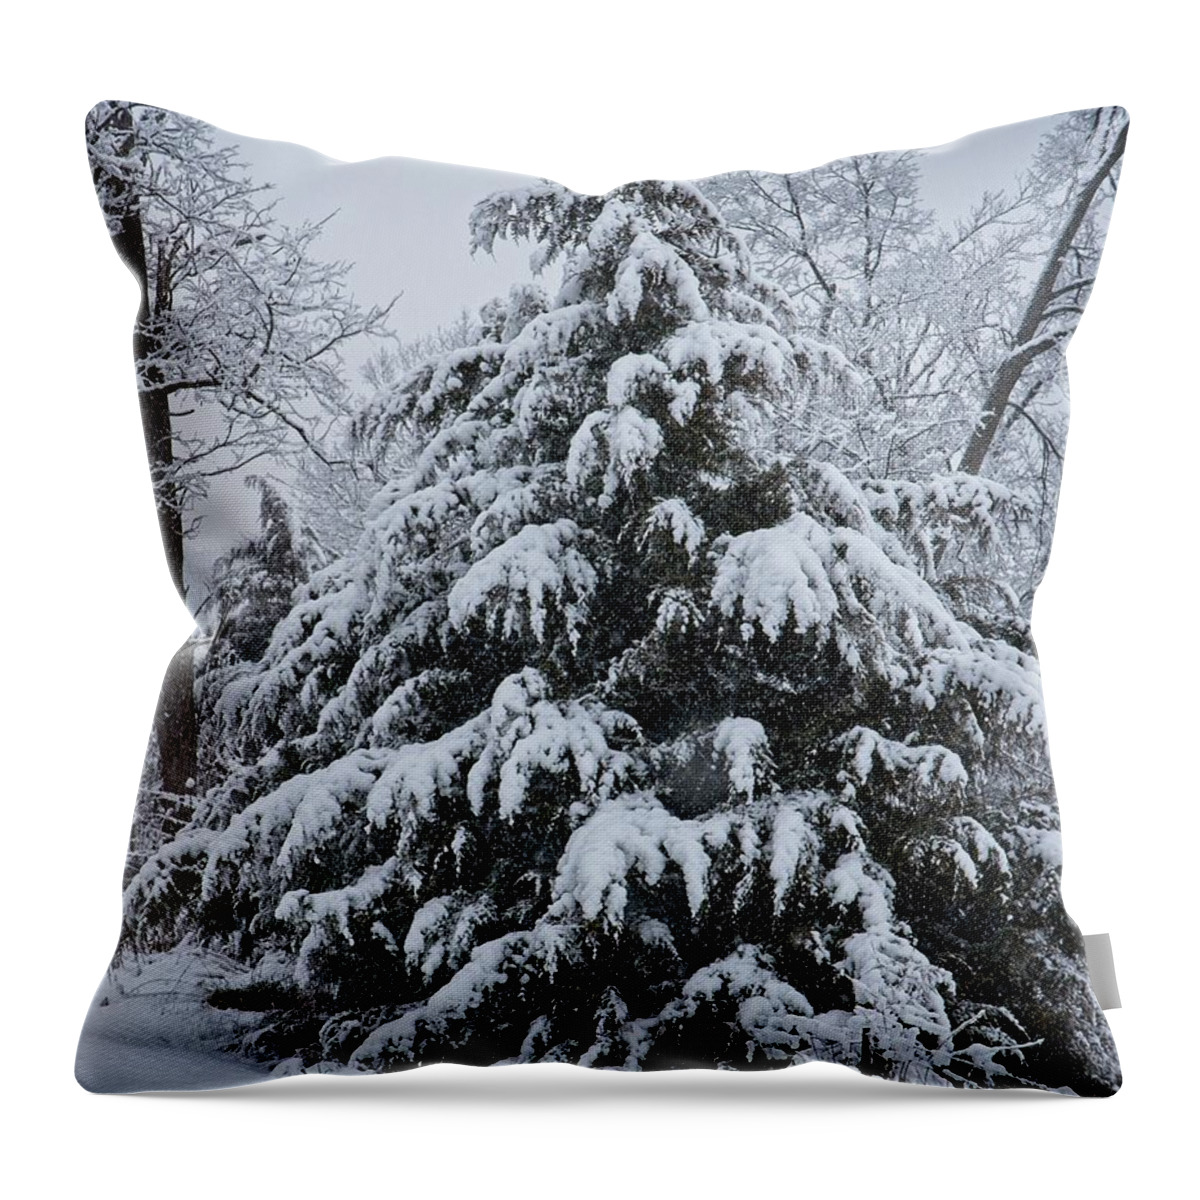 Snow Throw Pillow featuring the photograph Under The Weight of the Weather by Ronald Lutz